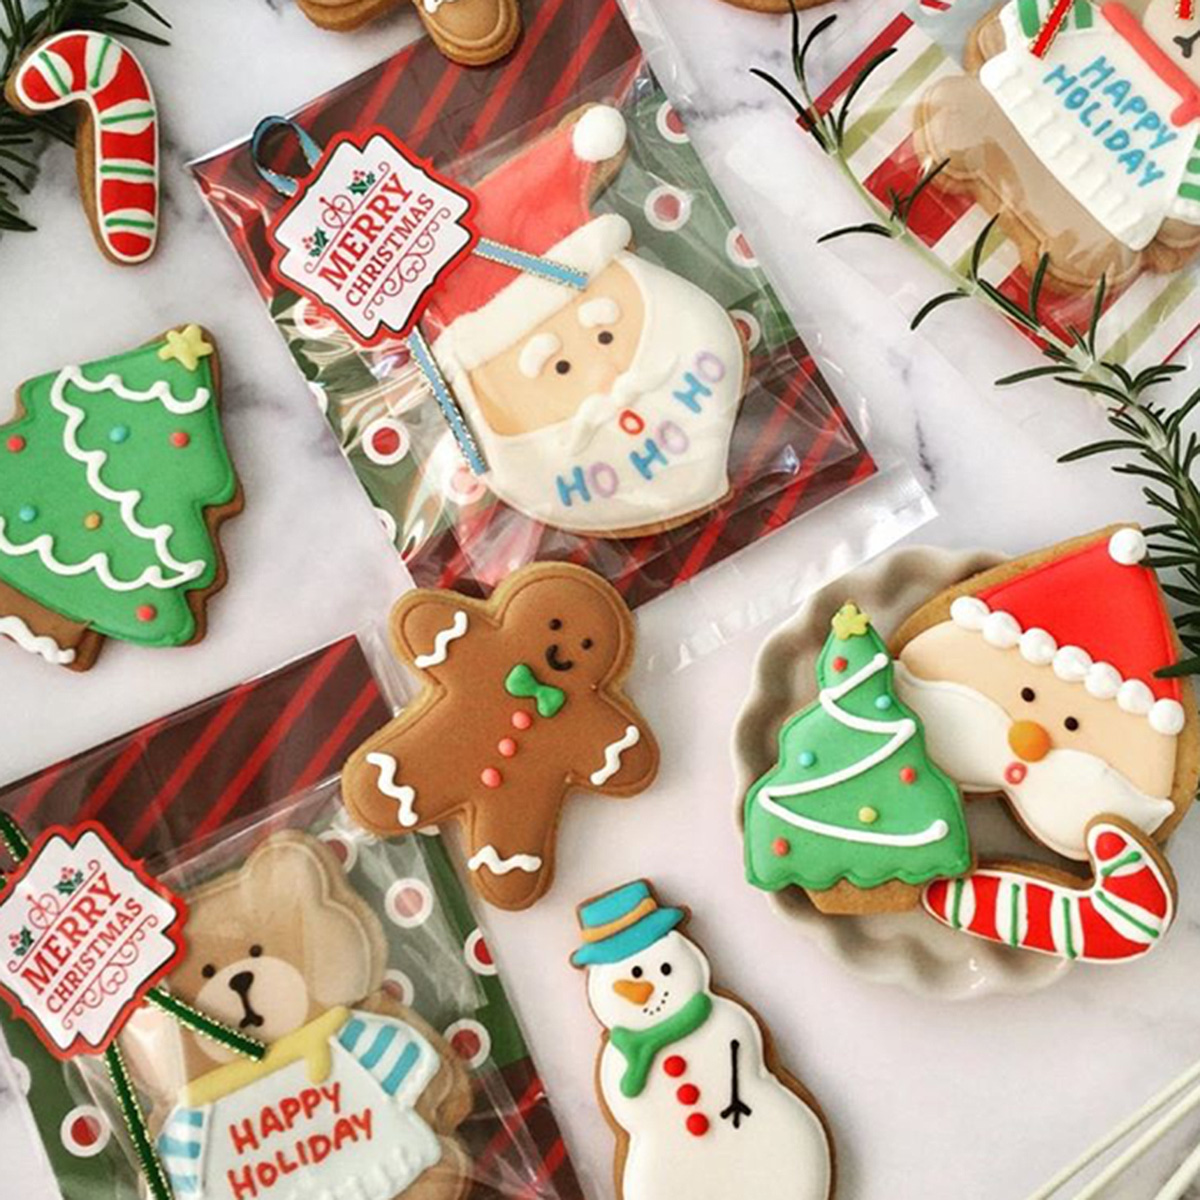 【Gallery】クリスマス2018 HOLIDAY COOKIES